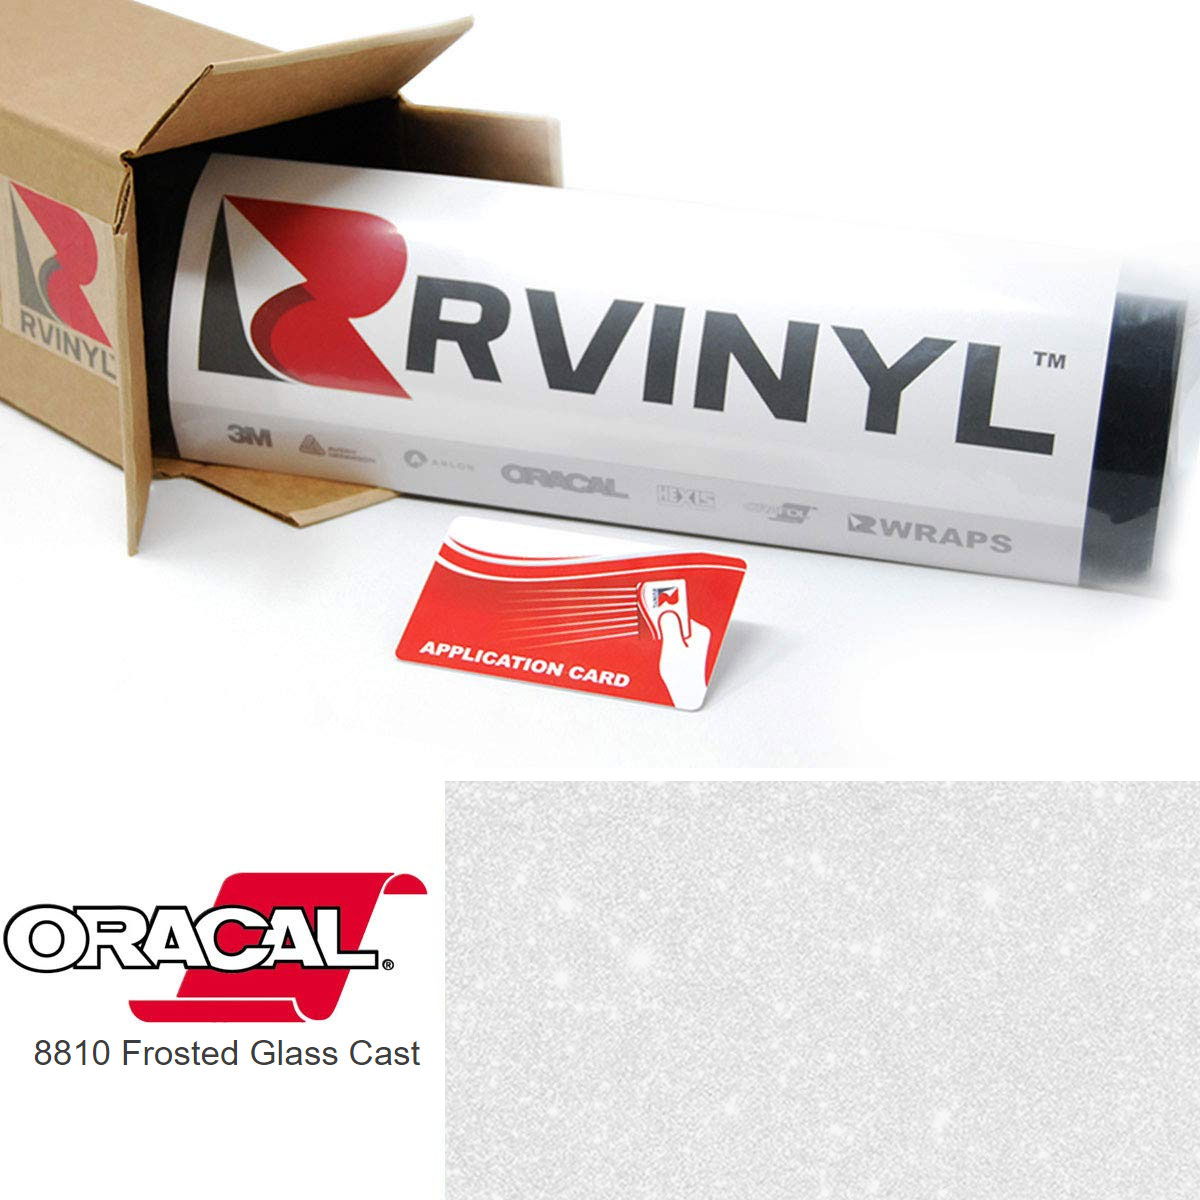 ORACAL 8810 Silver Gray Frosted Calendered Film